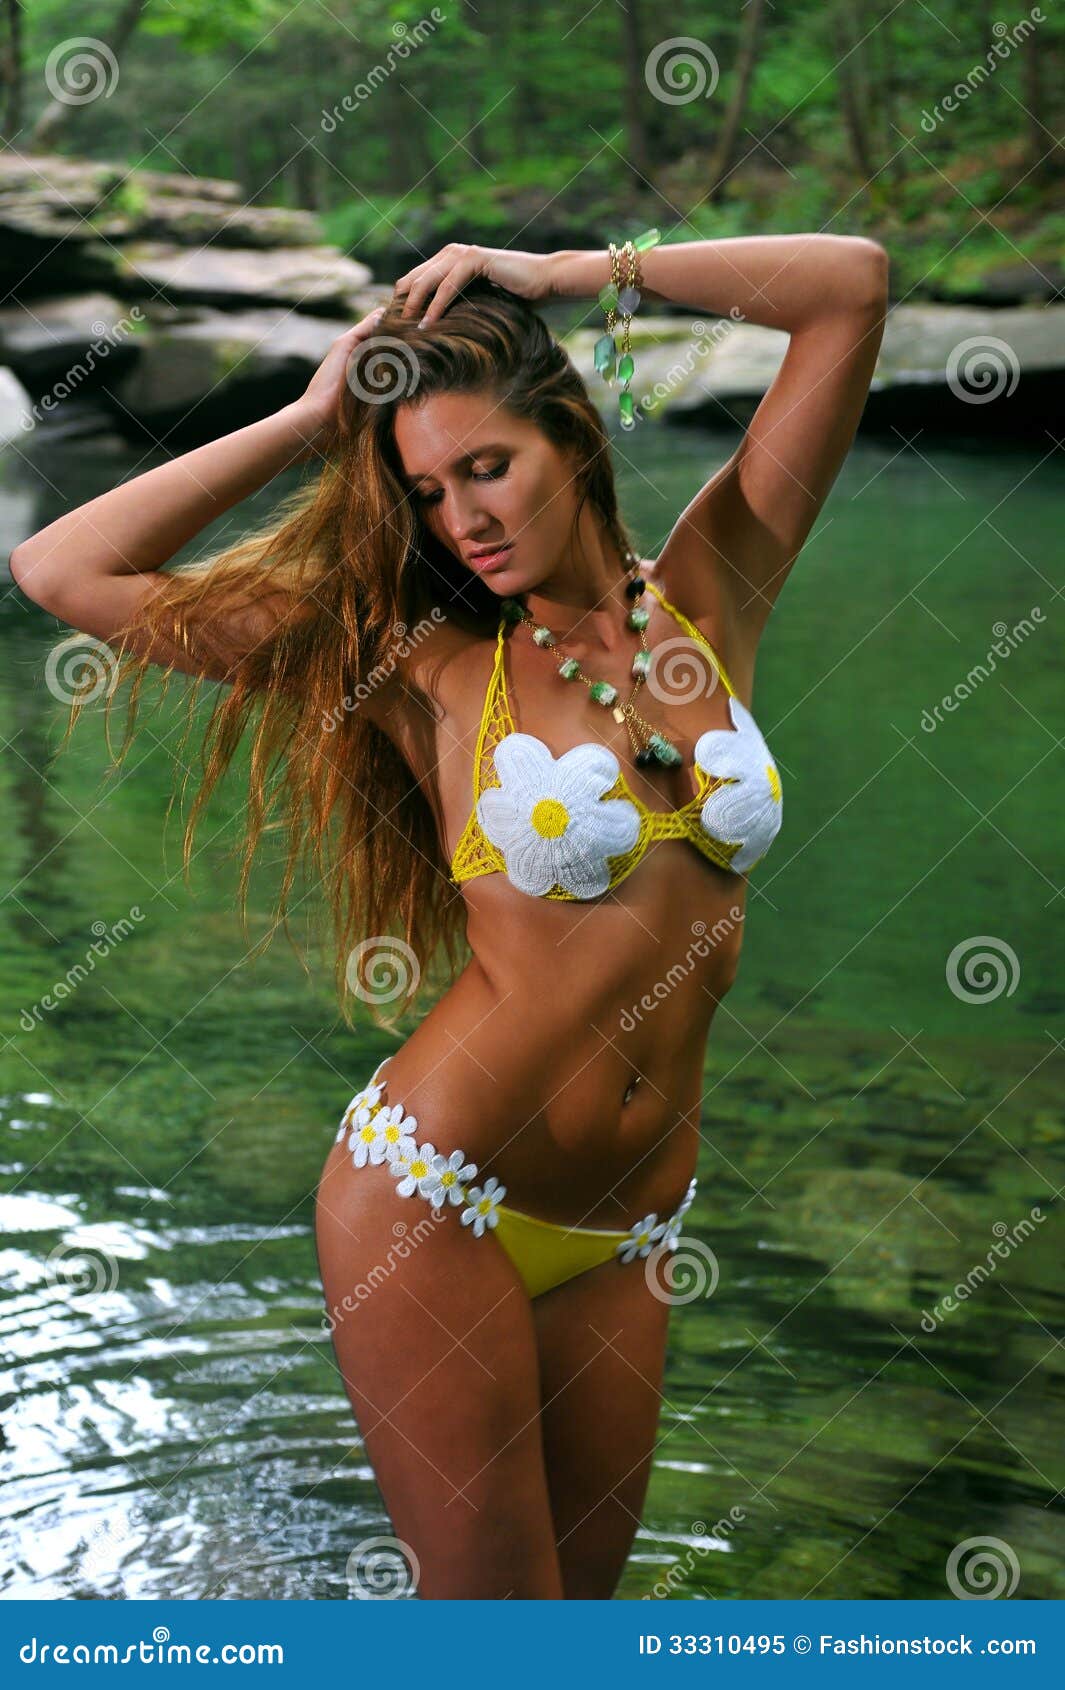 Young Woman Posing in Designer Bikini at Exotic Location of Mountain River  Stock Image - Image of emerald, hair: 33310495